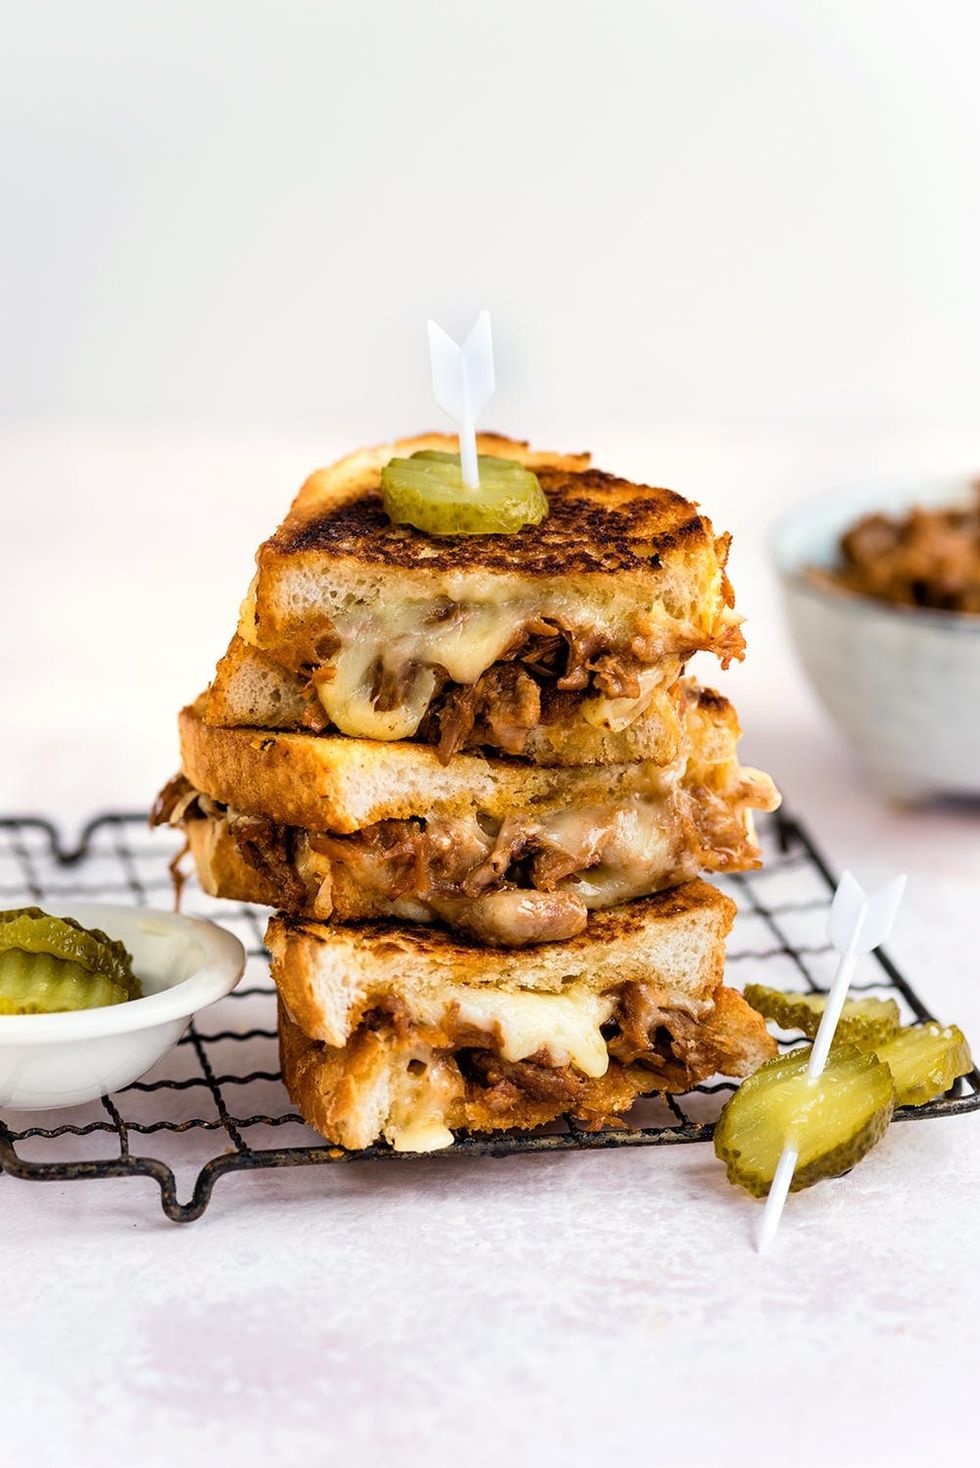 This pulled pork grilled cheese sandwich is the ultimate father's day recipe!